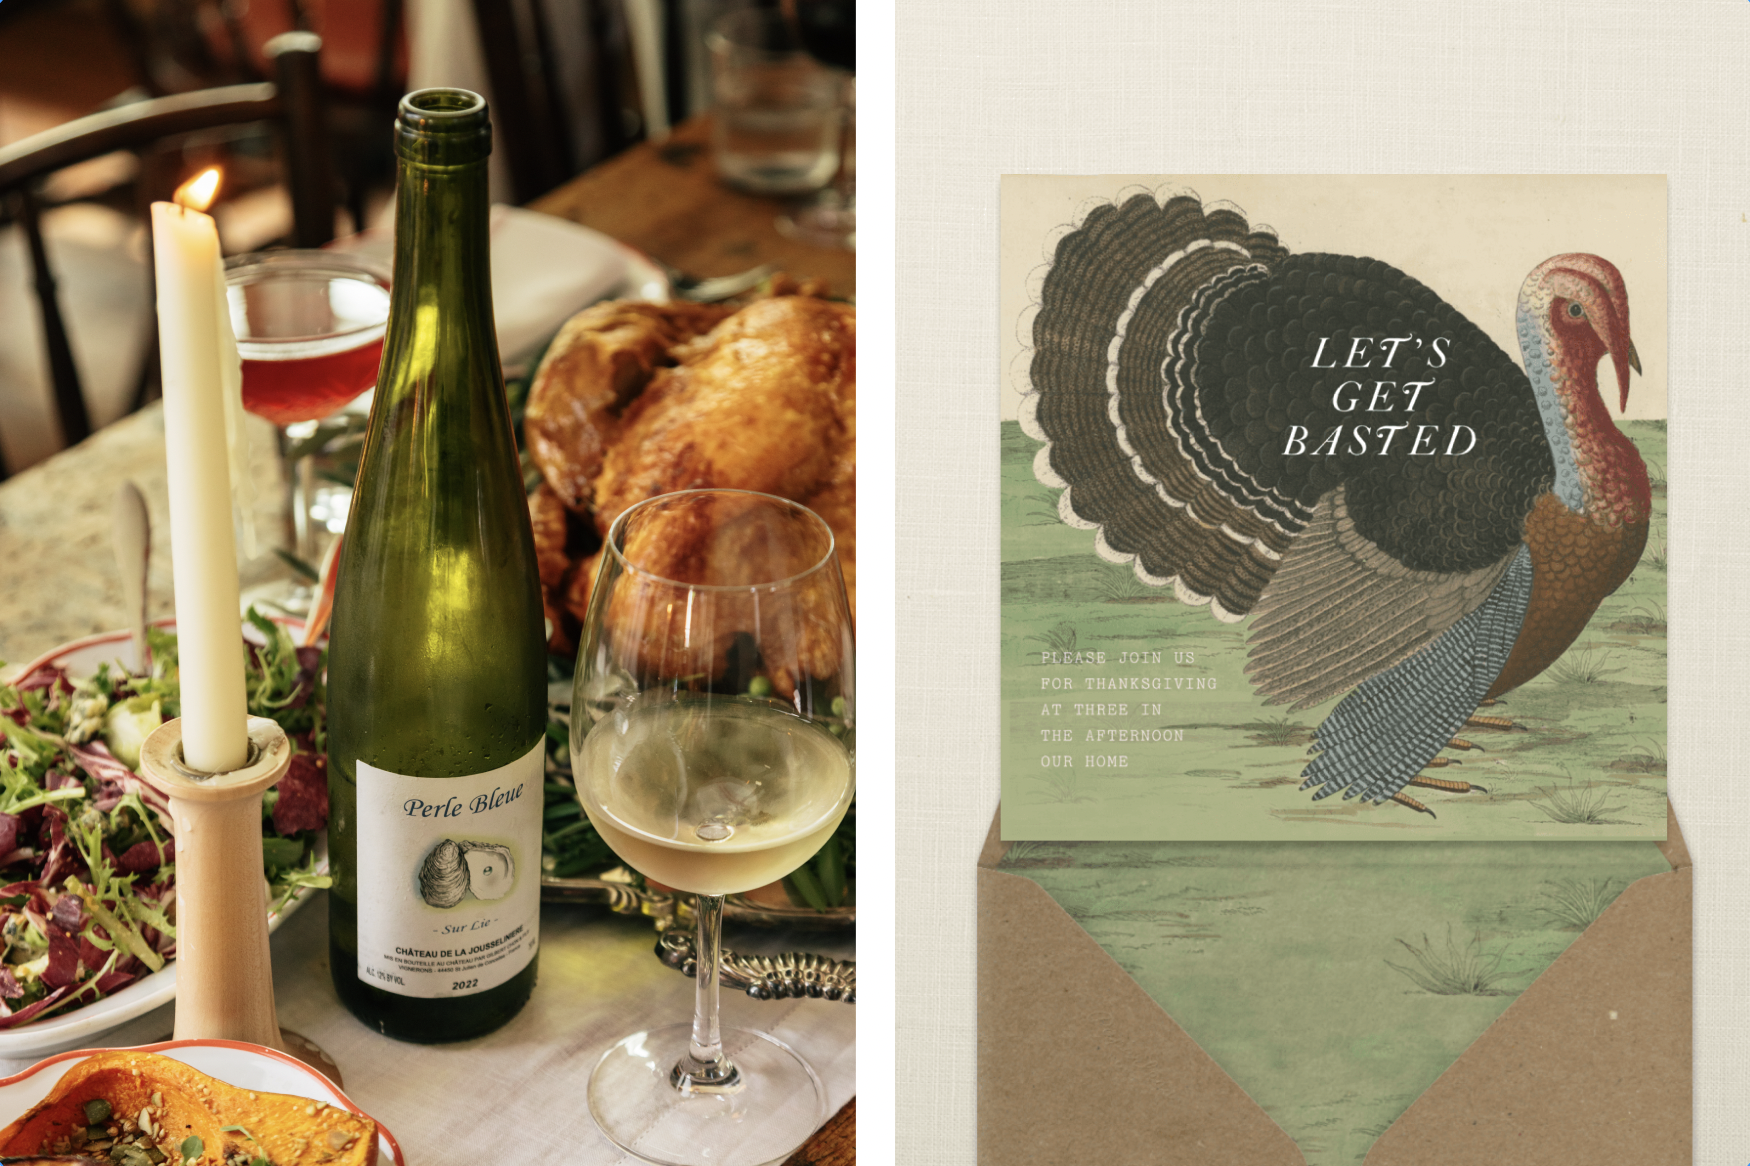 Left: Bottle of opened white wine next to a lit taper candle on the Thanksgiving table. Right: Party invitation that reads "Let's Get Basted" on a turkey. 